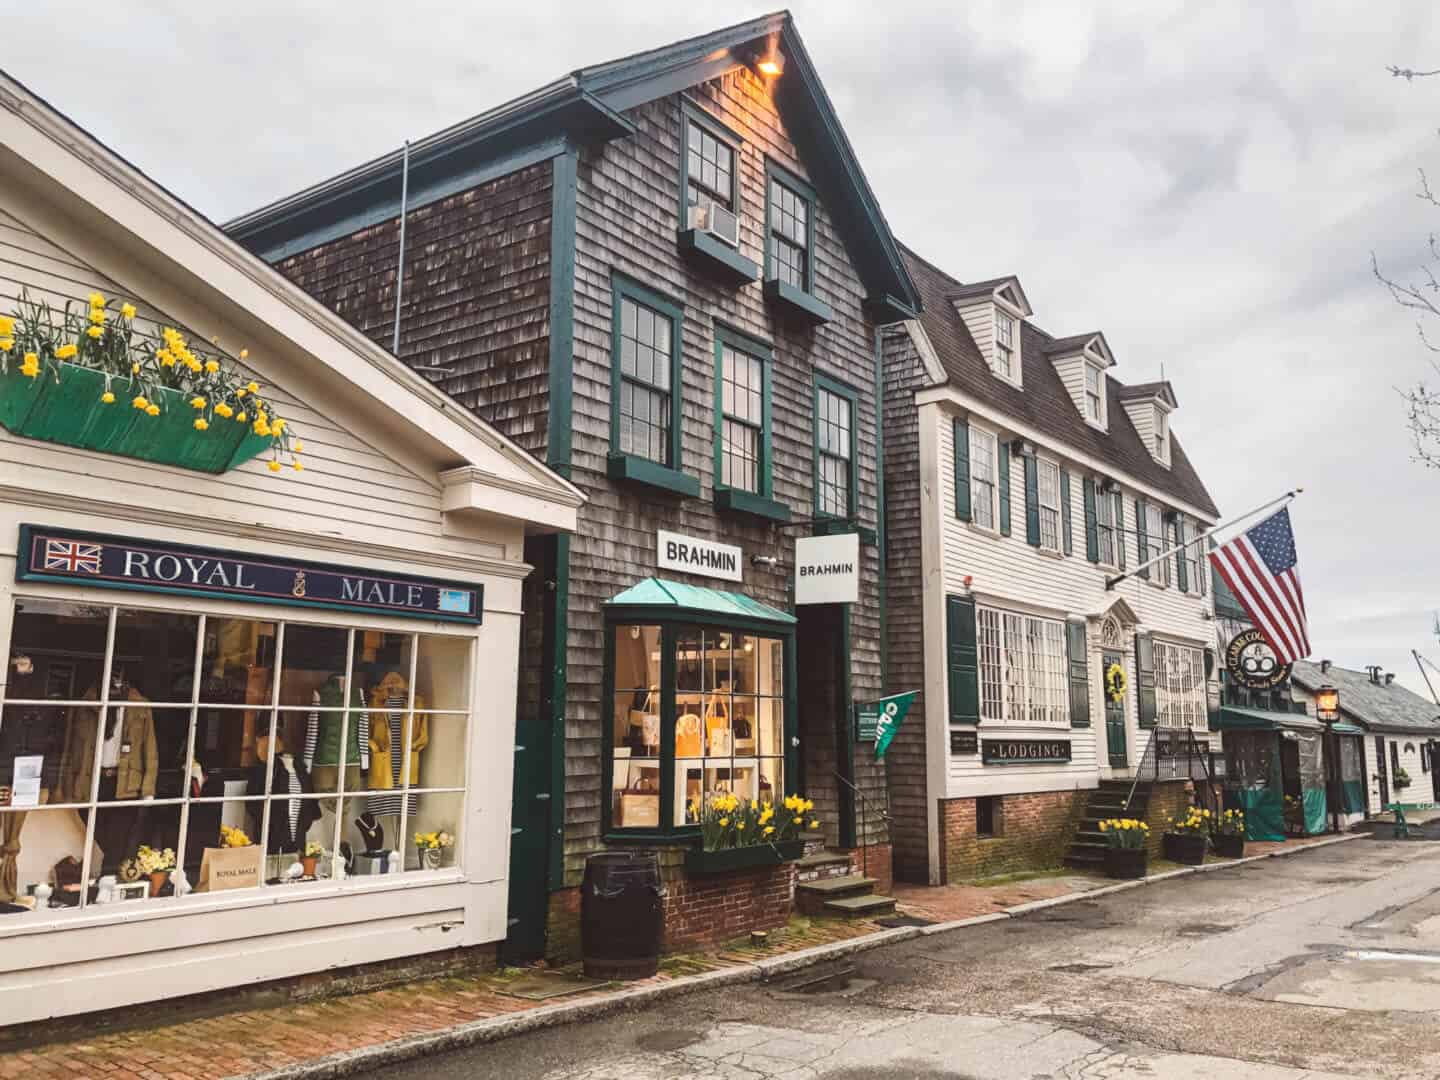 From Boston:  How to Spend One Day in Newport, Rhode Island